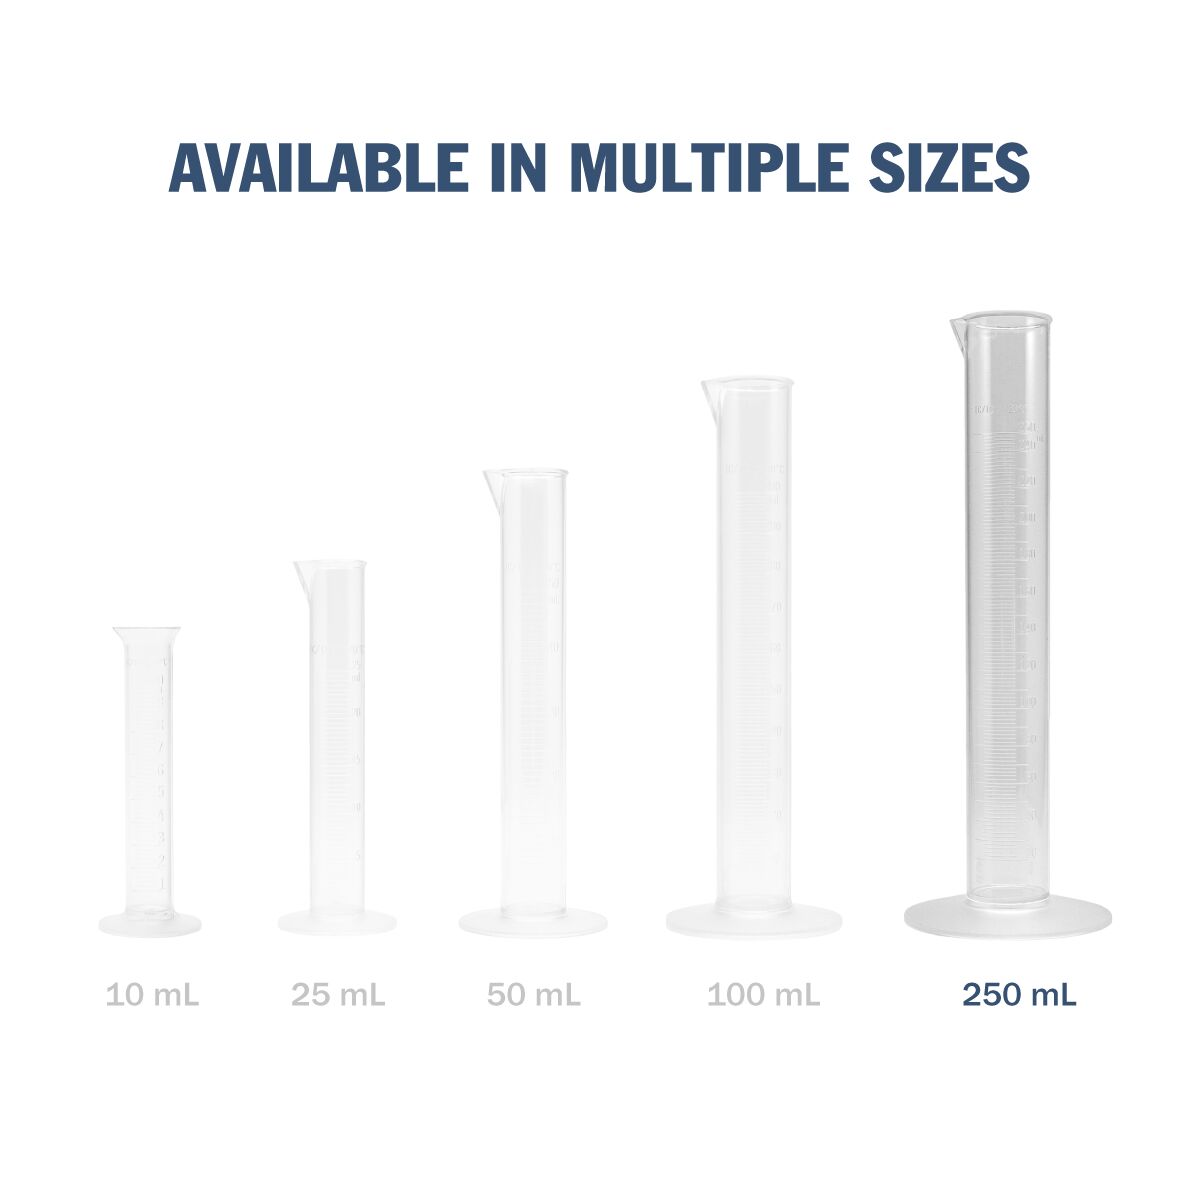 Transparent &amp; Autoclavable Graduated Cylinder available in multiple sizes - 250 mL